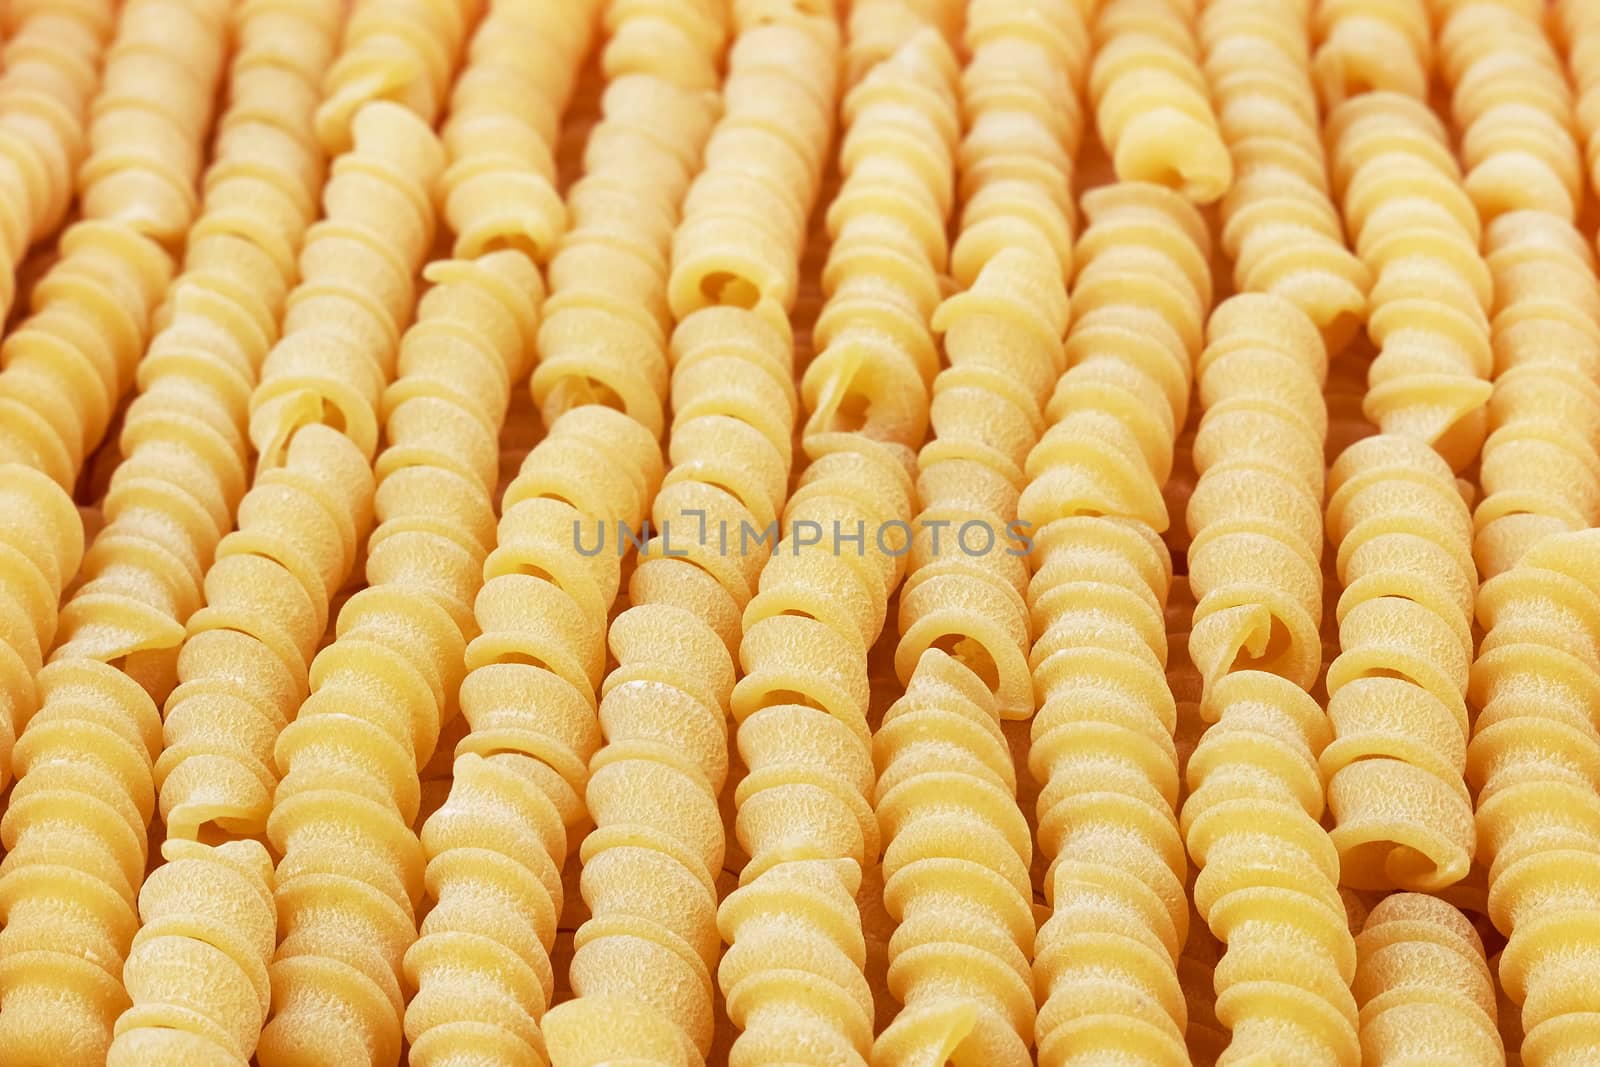 Italian uncooked wheat spiral pasta closeup sorted vertically.